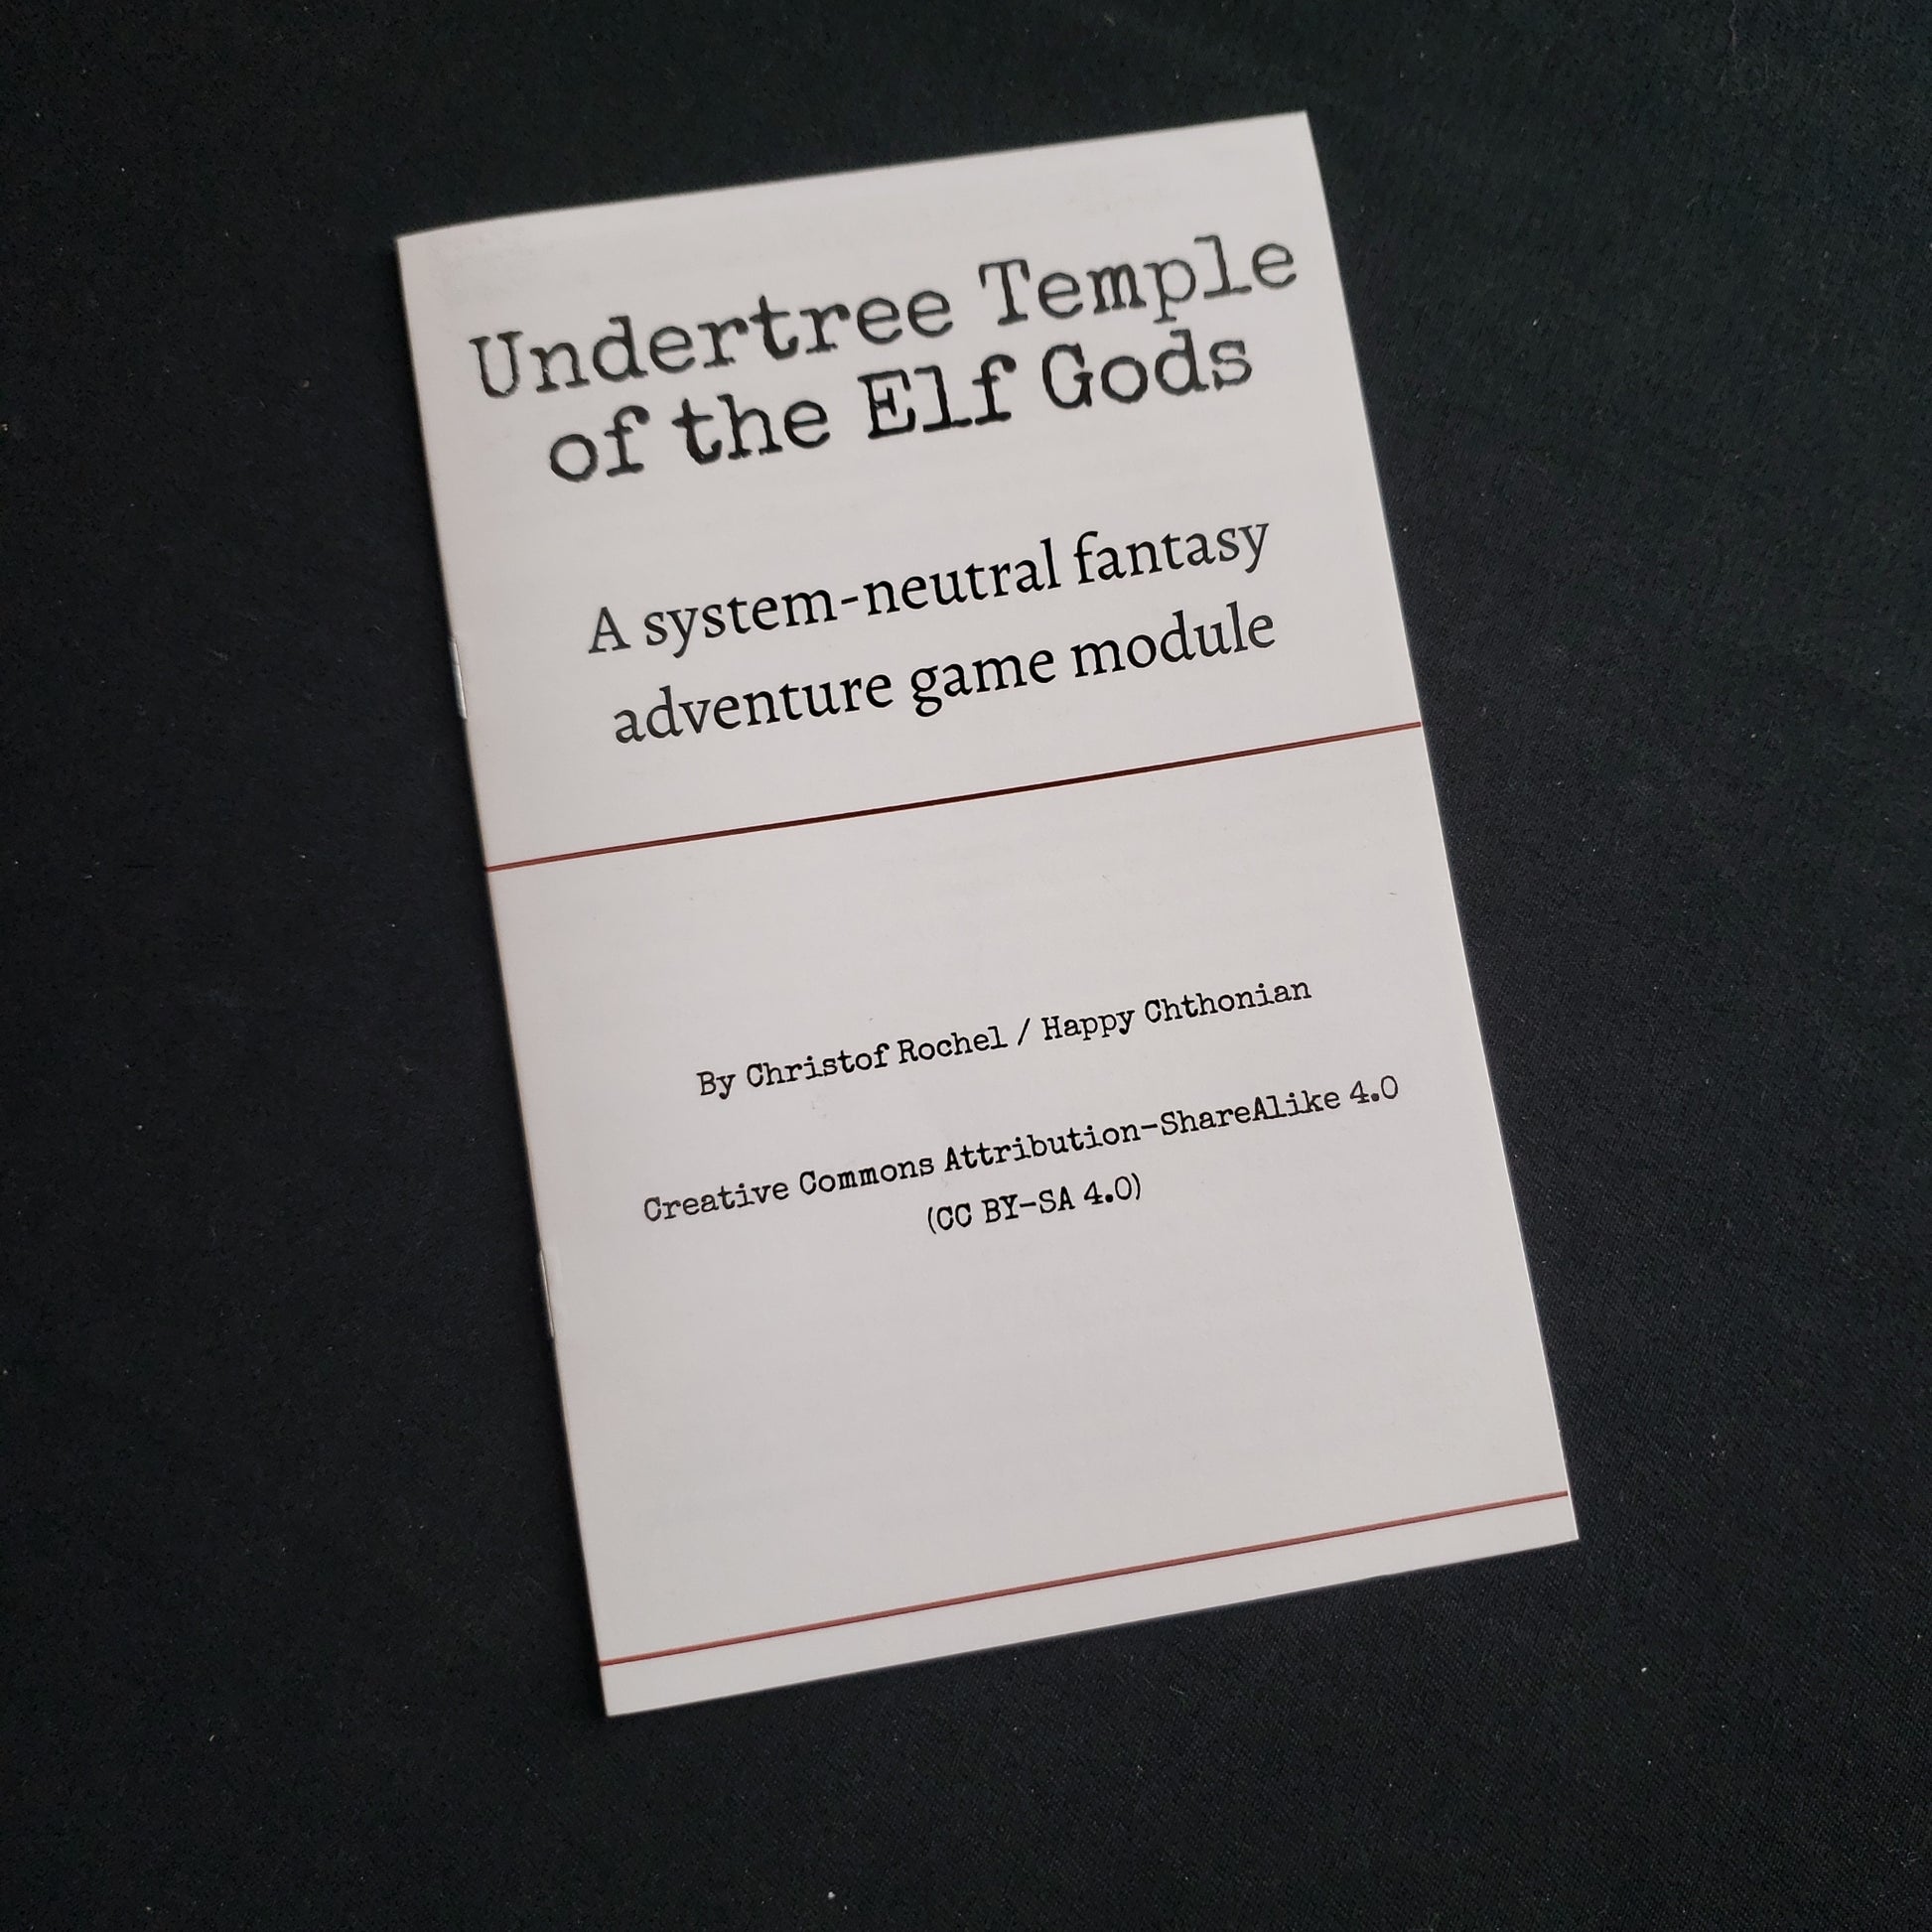 Image shows the front cover of the Undertree Temple of the Elf Gods roleplaying game book